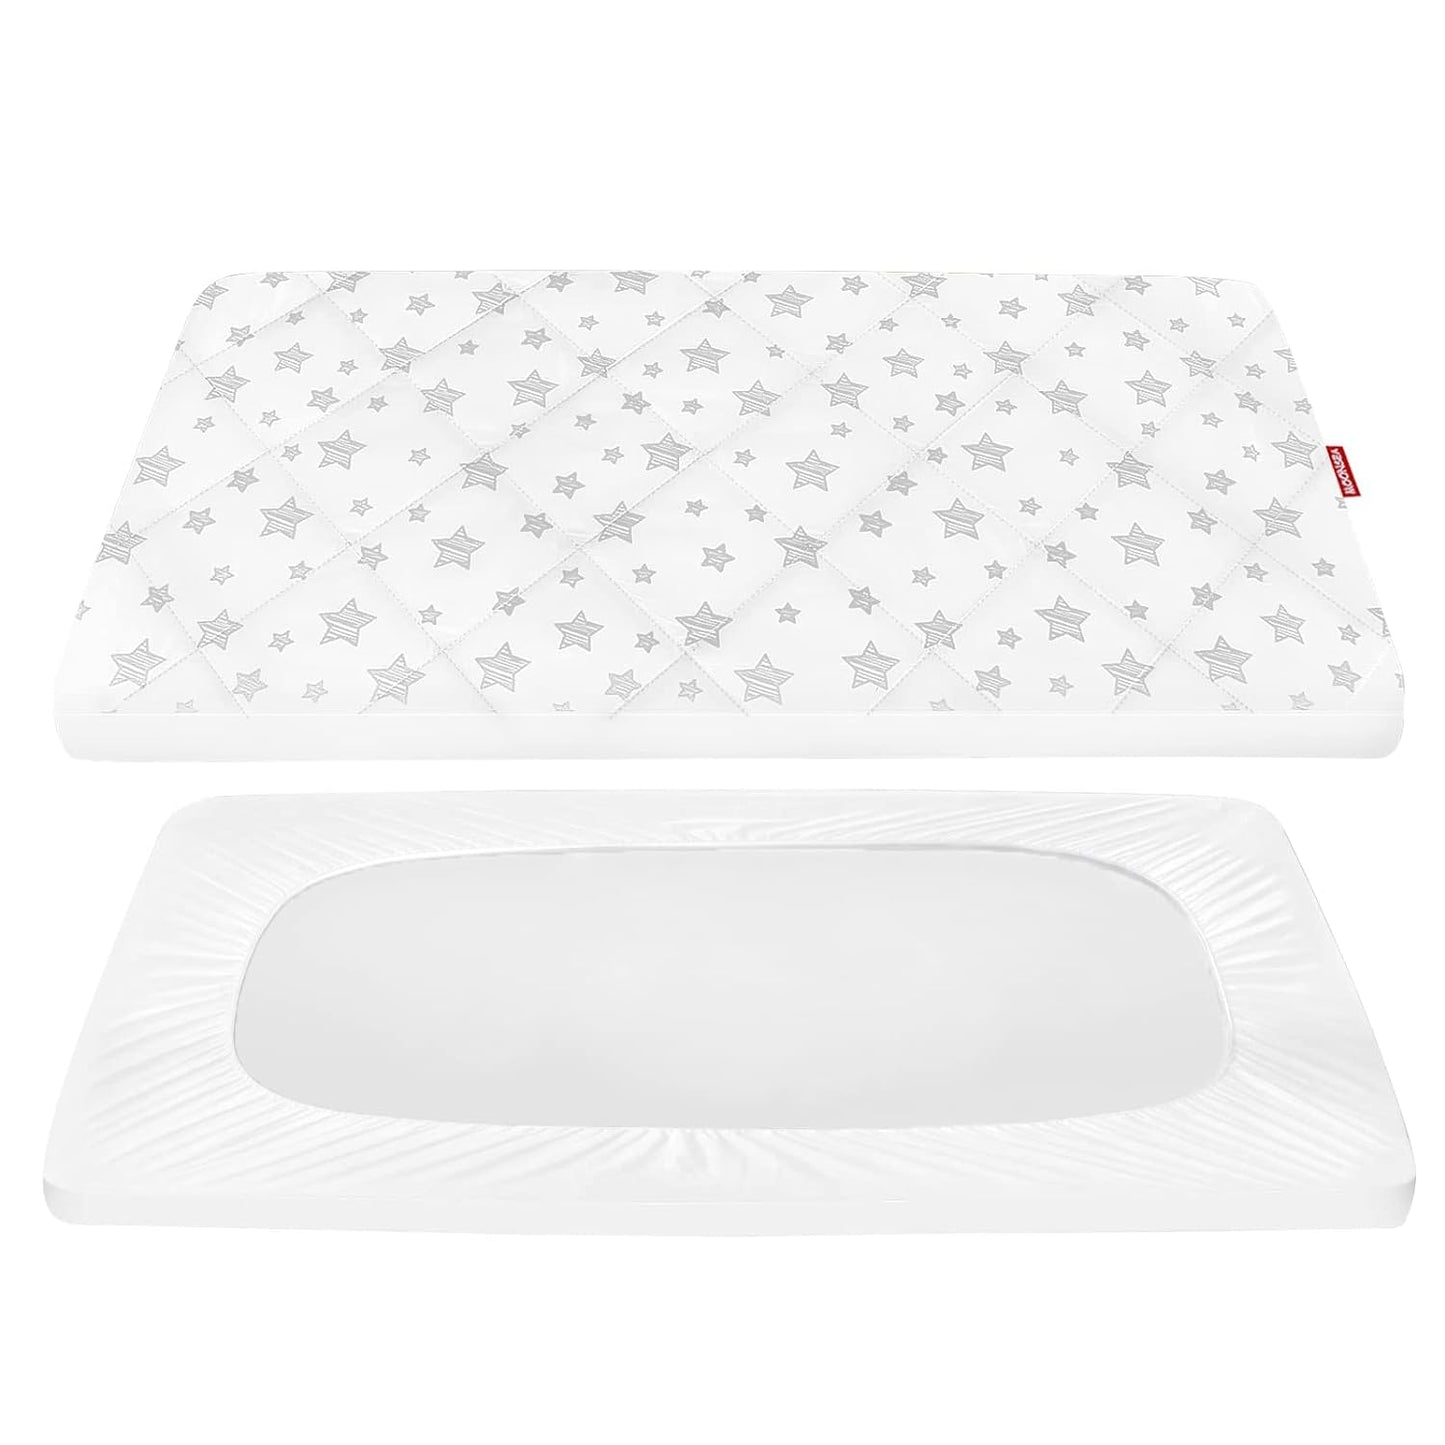 Pack n Play Sheet Quilted | Mini Crib Sheet - Pack and Play Mattress Pad Cover, Ultra-Soft Microfiber, Fits Graco Pack and Play, White Star-Moonsea Bedding